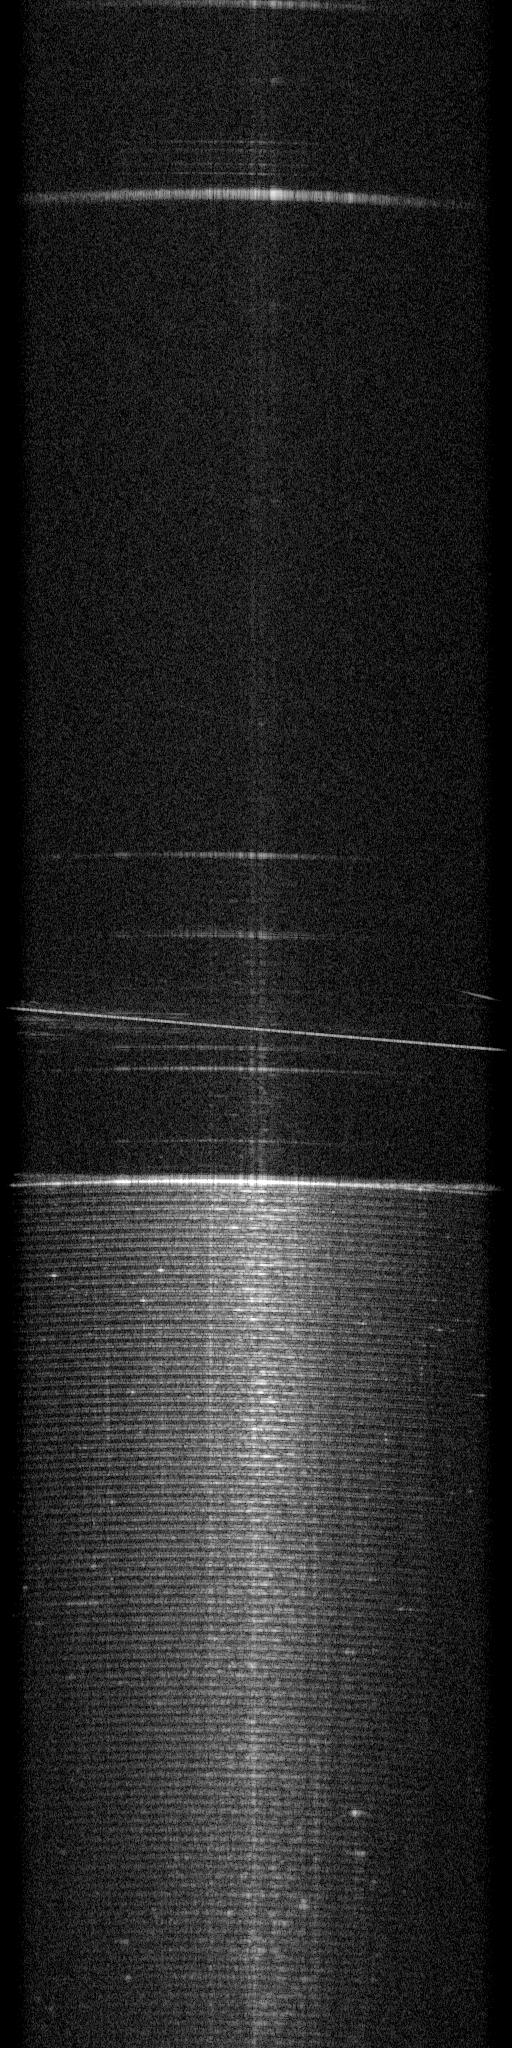 efficient sources for interference with the other layers. On the other hand, full-field OCT images of scotch tape layers are dominated by coherent noise (Fig.